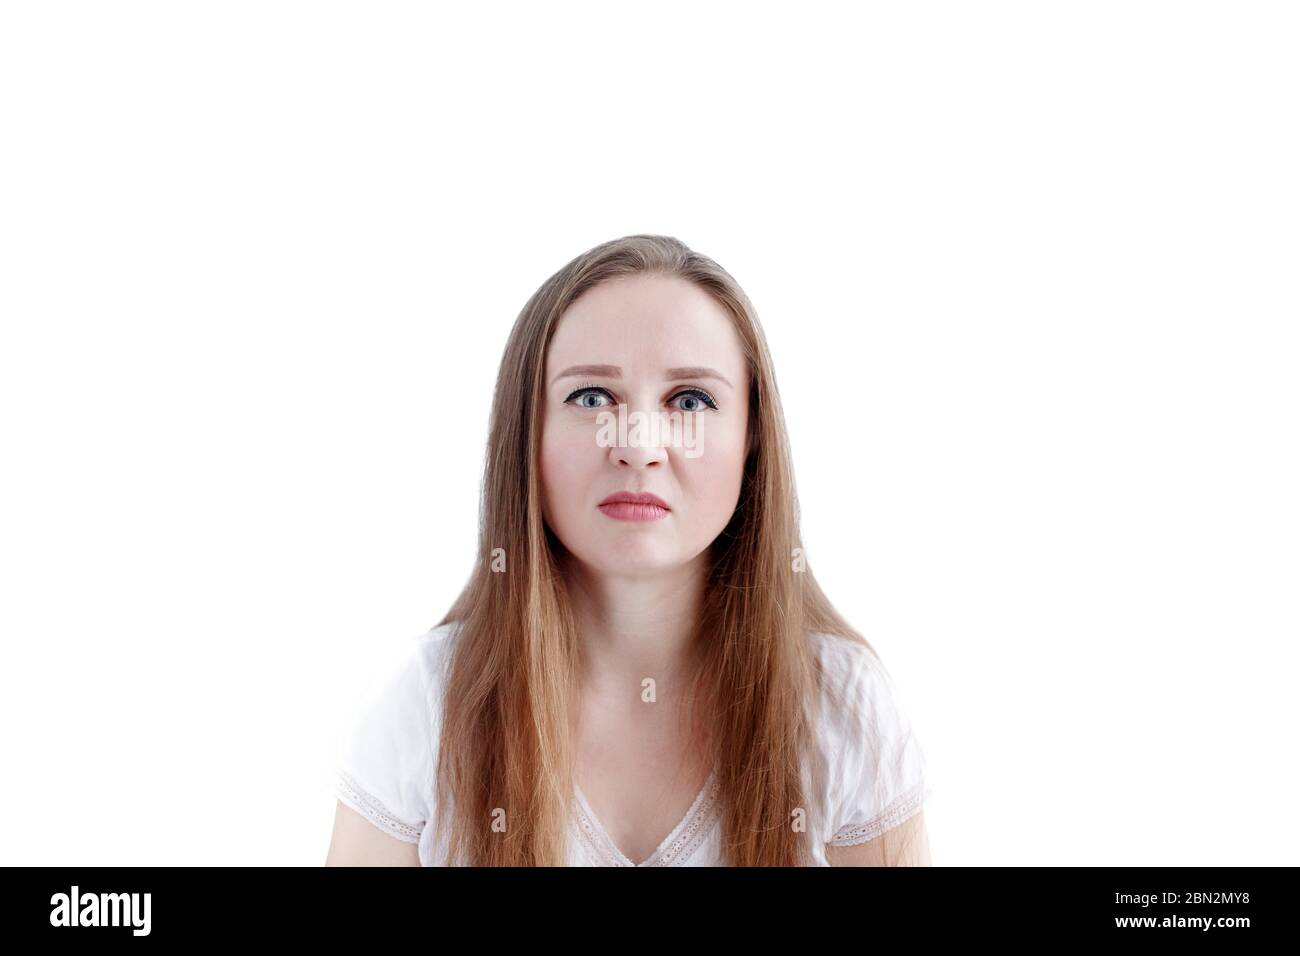 Confused young caucasian woman with disgusted facial expression and grimacing, isolated on white background. Negative emotion. Stock Photo